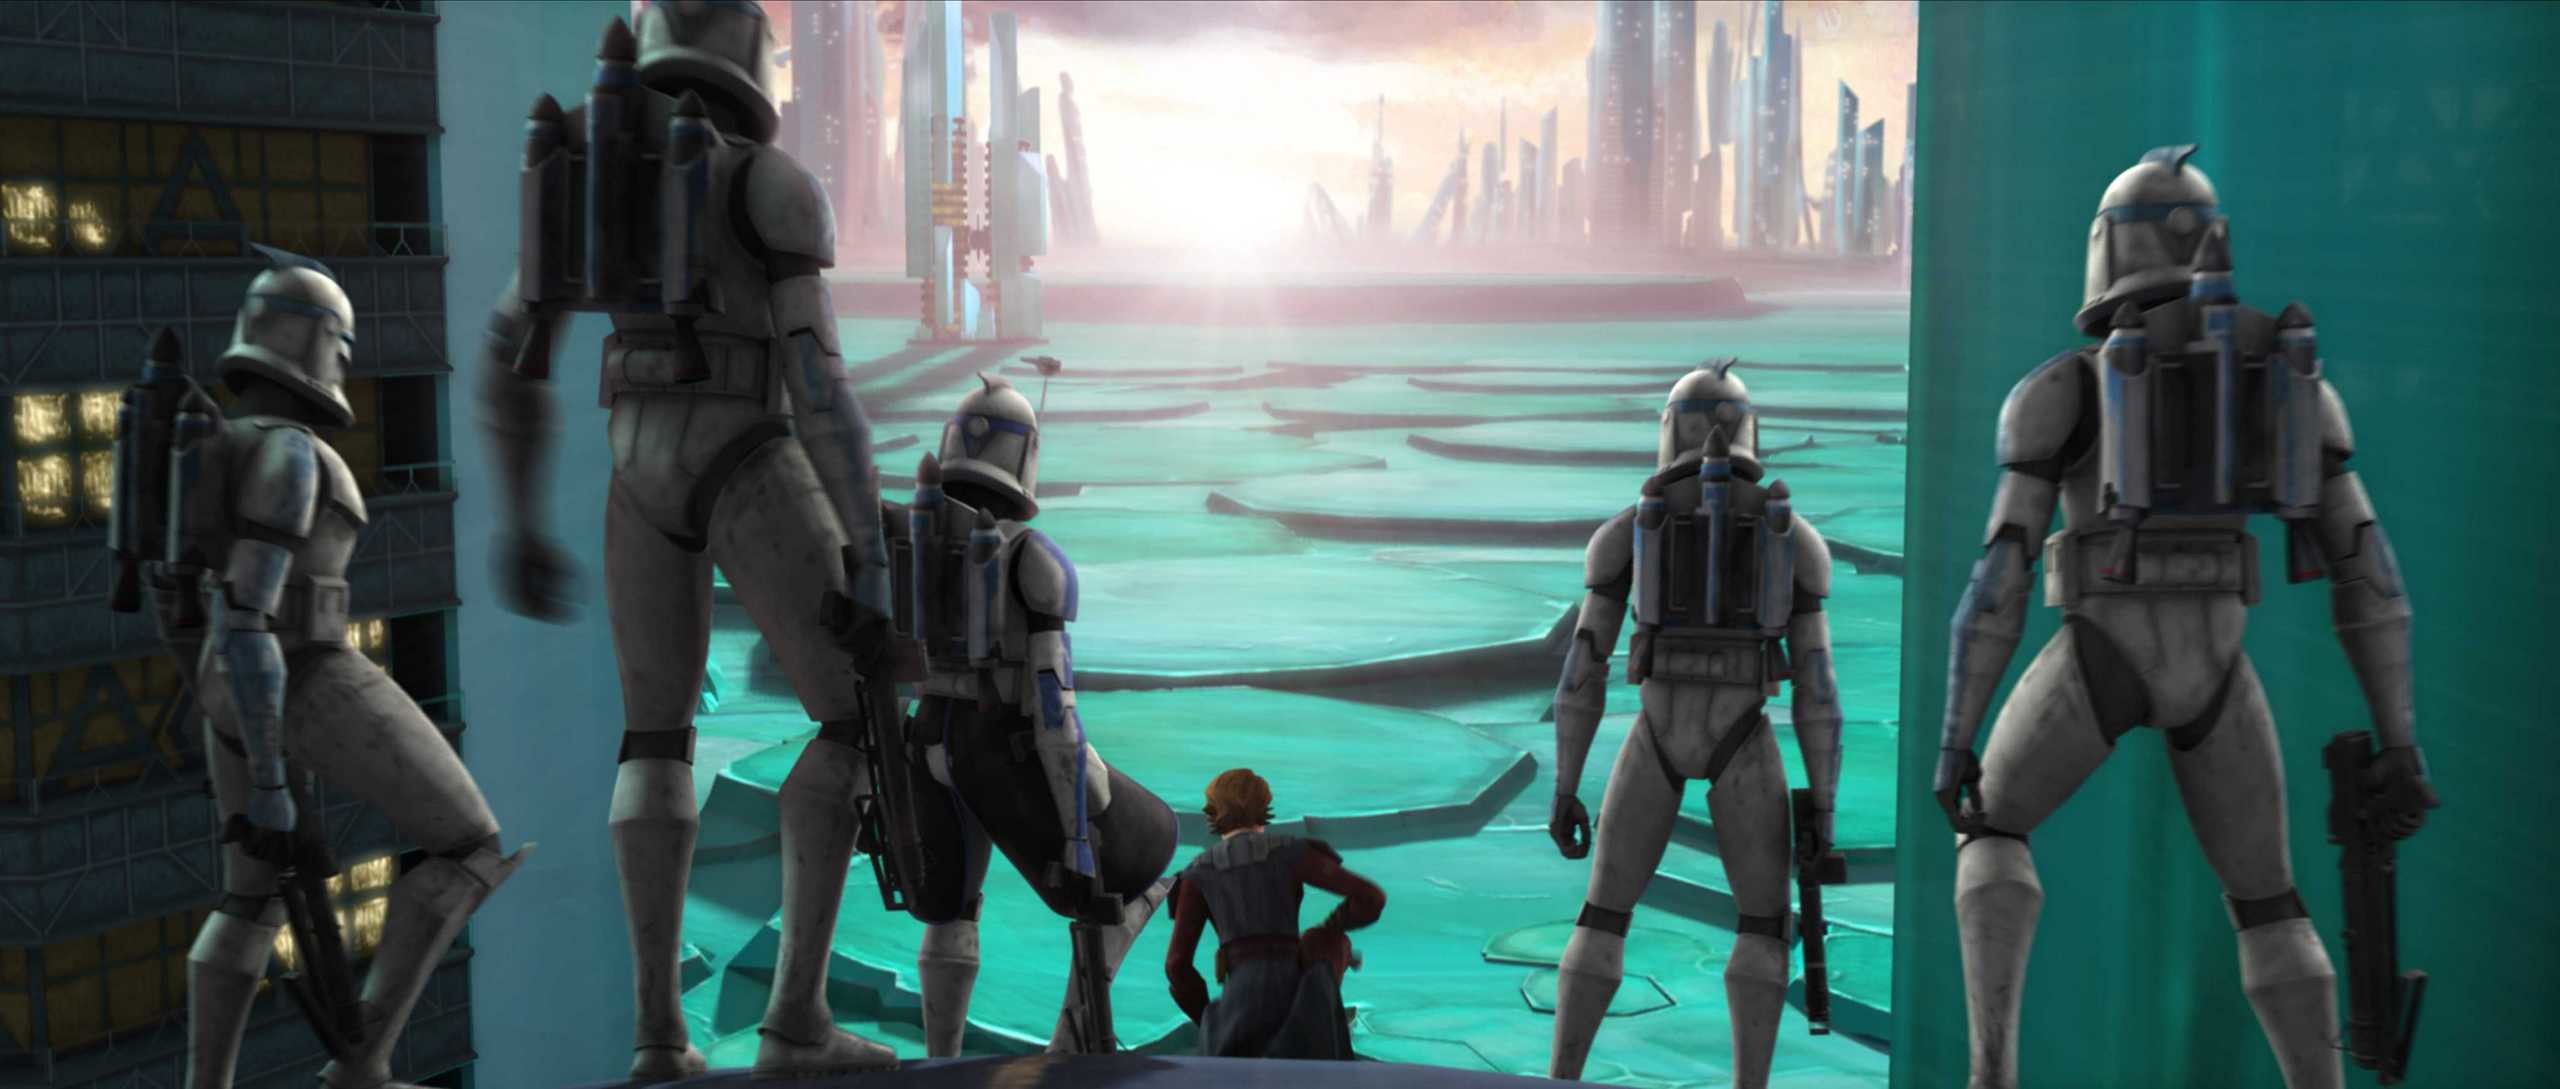 2560x1089 Star Wars: Clone Wars images Clone Wars HD wallpaper and background photos